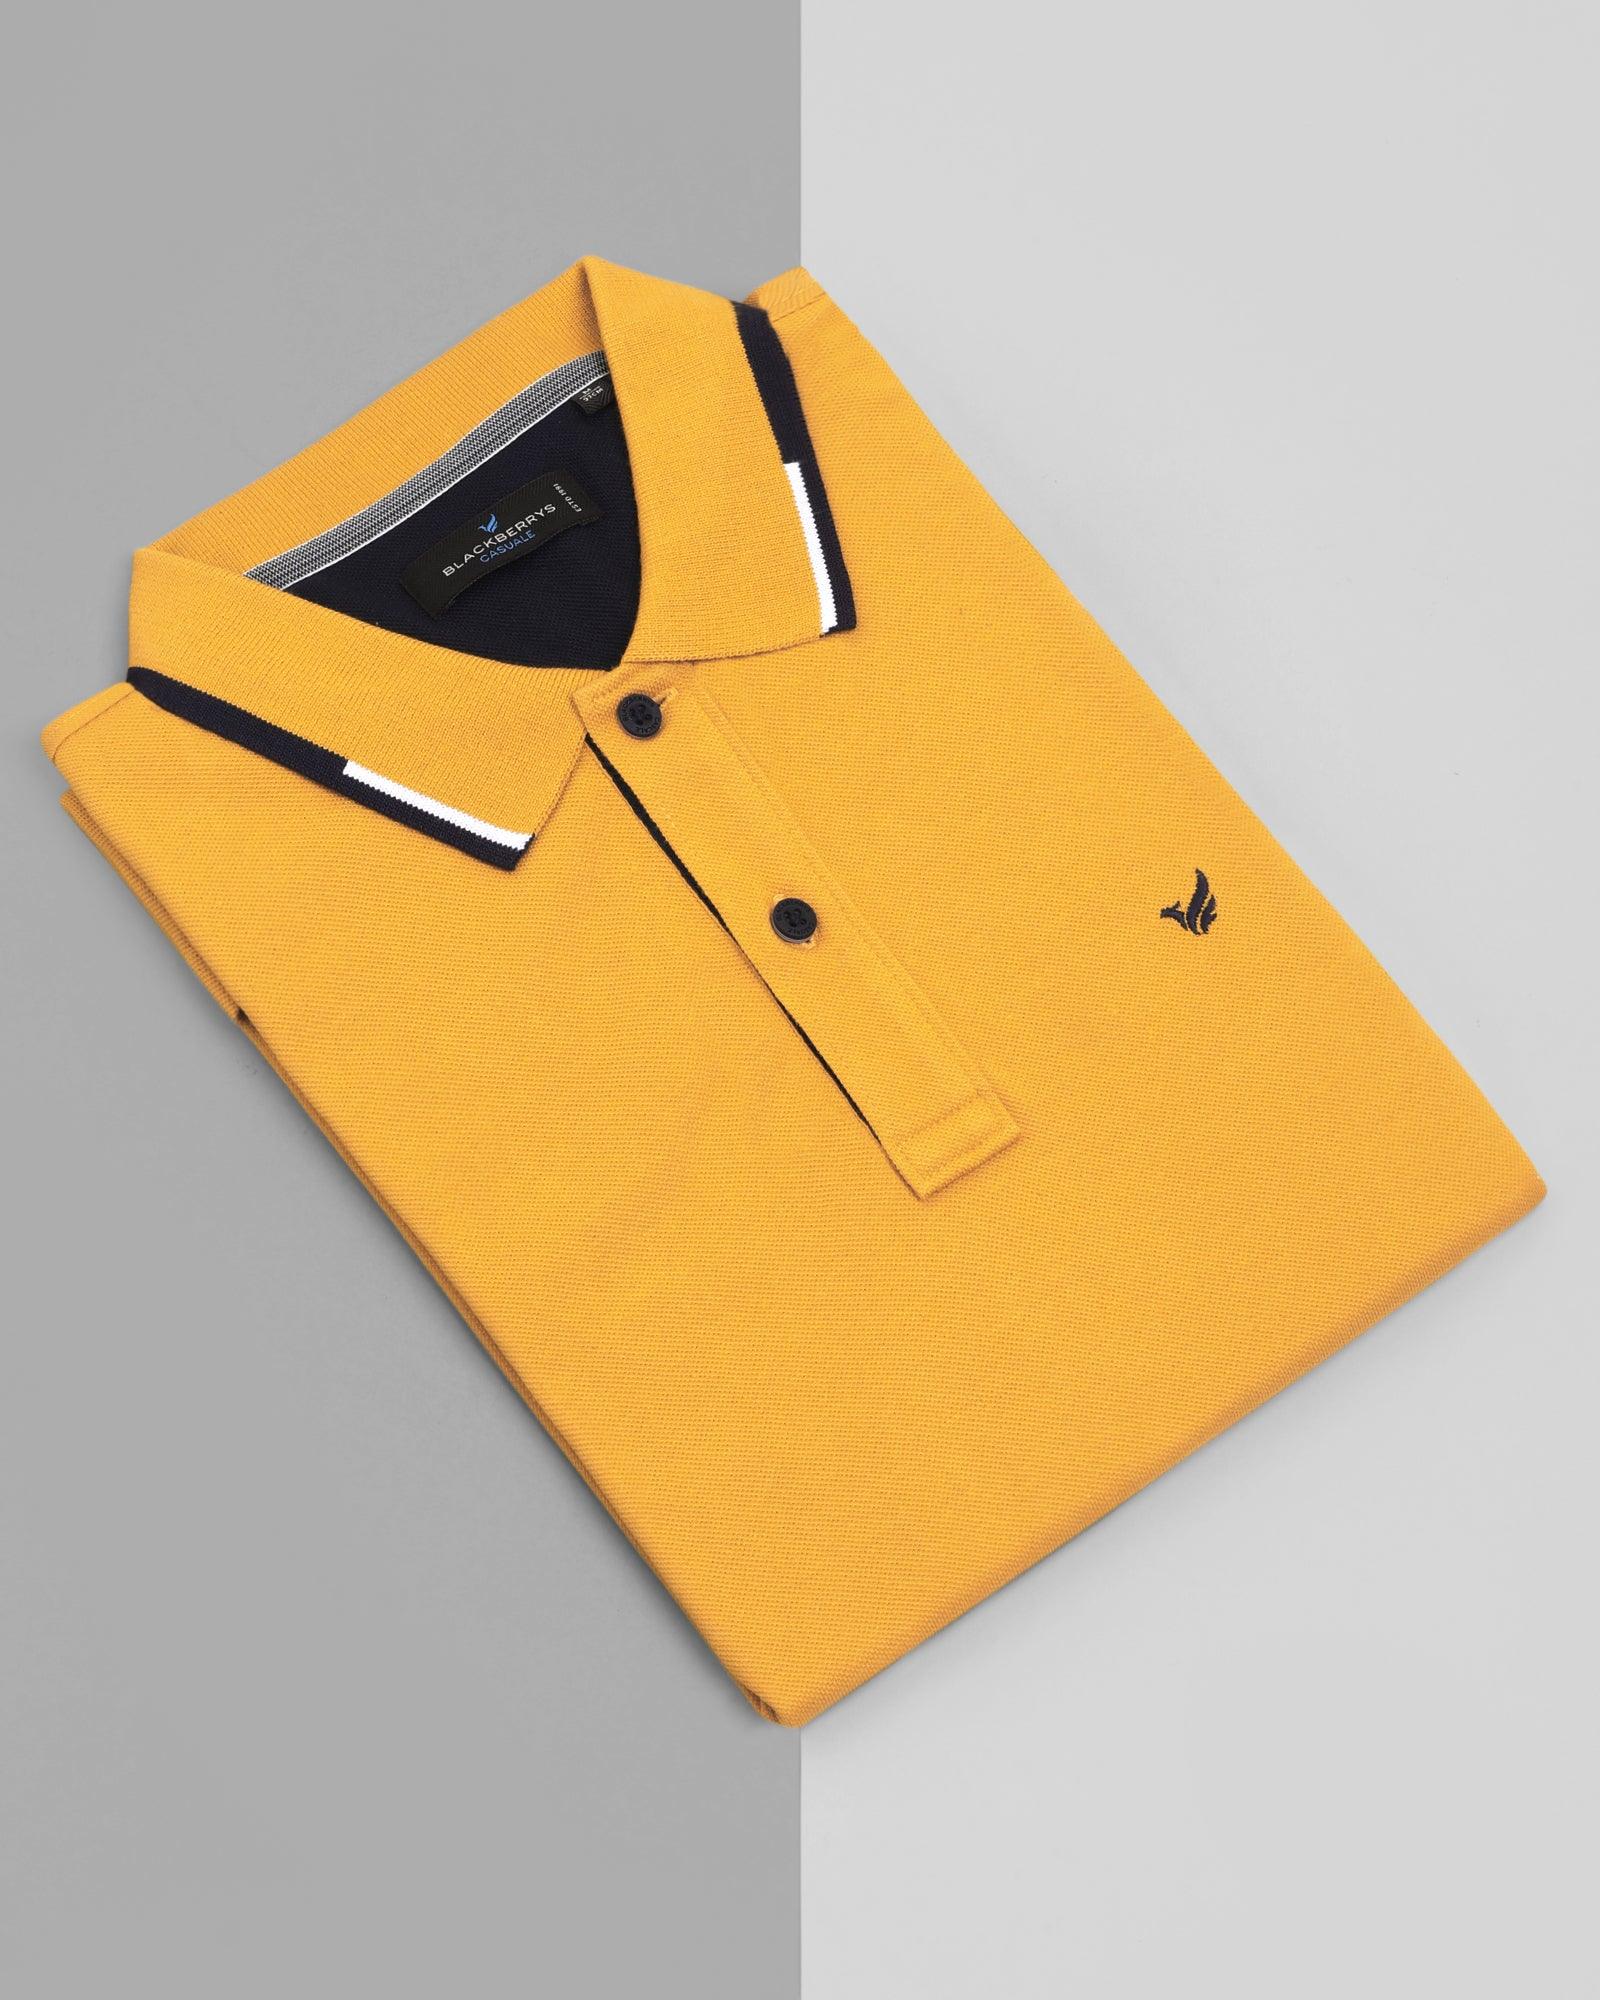 Polo Misted Yellow Solid T Shirt - Tempo